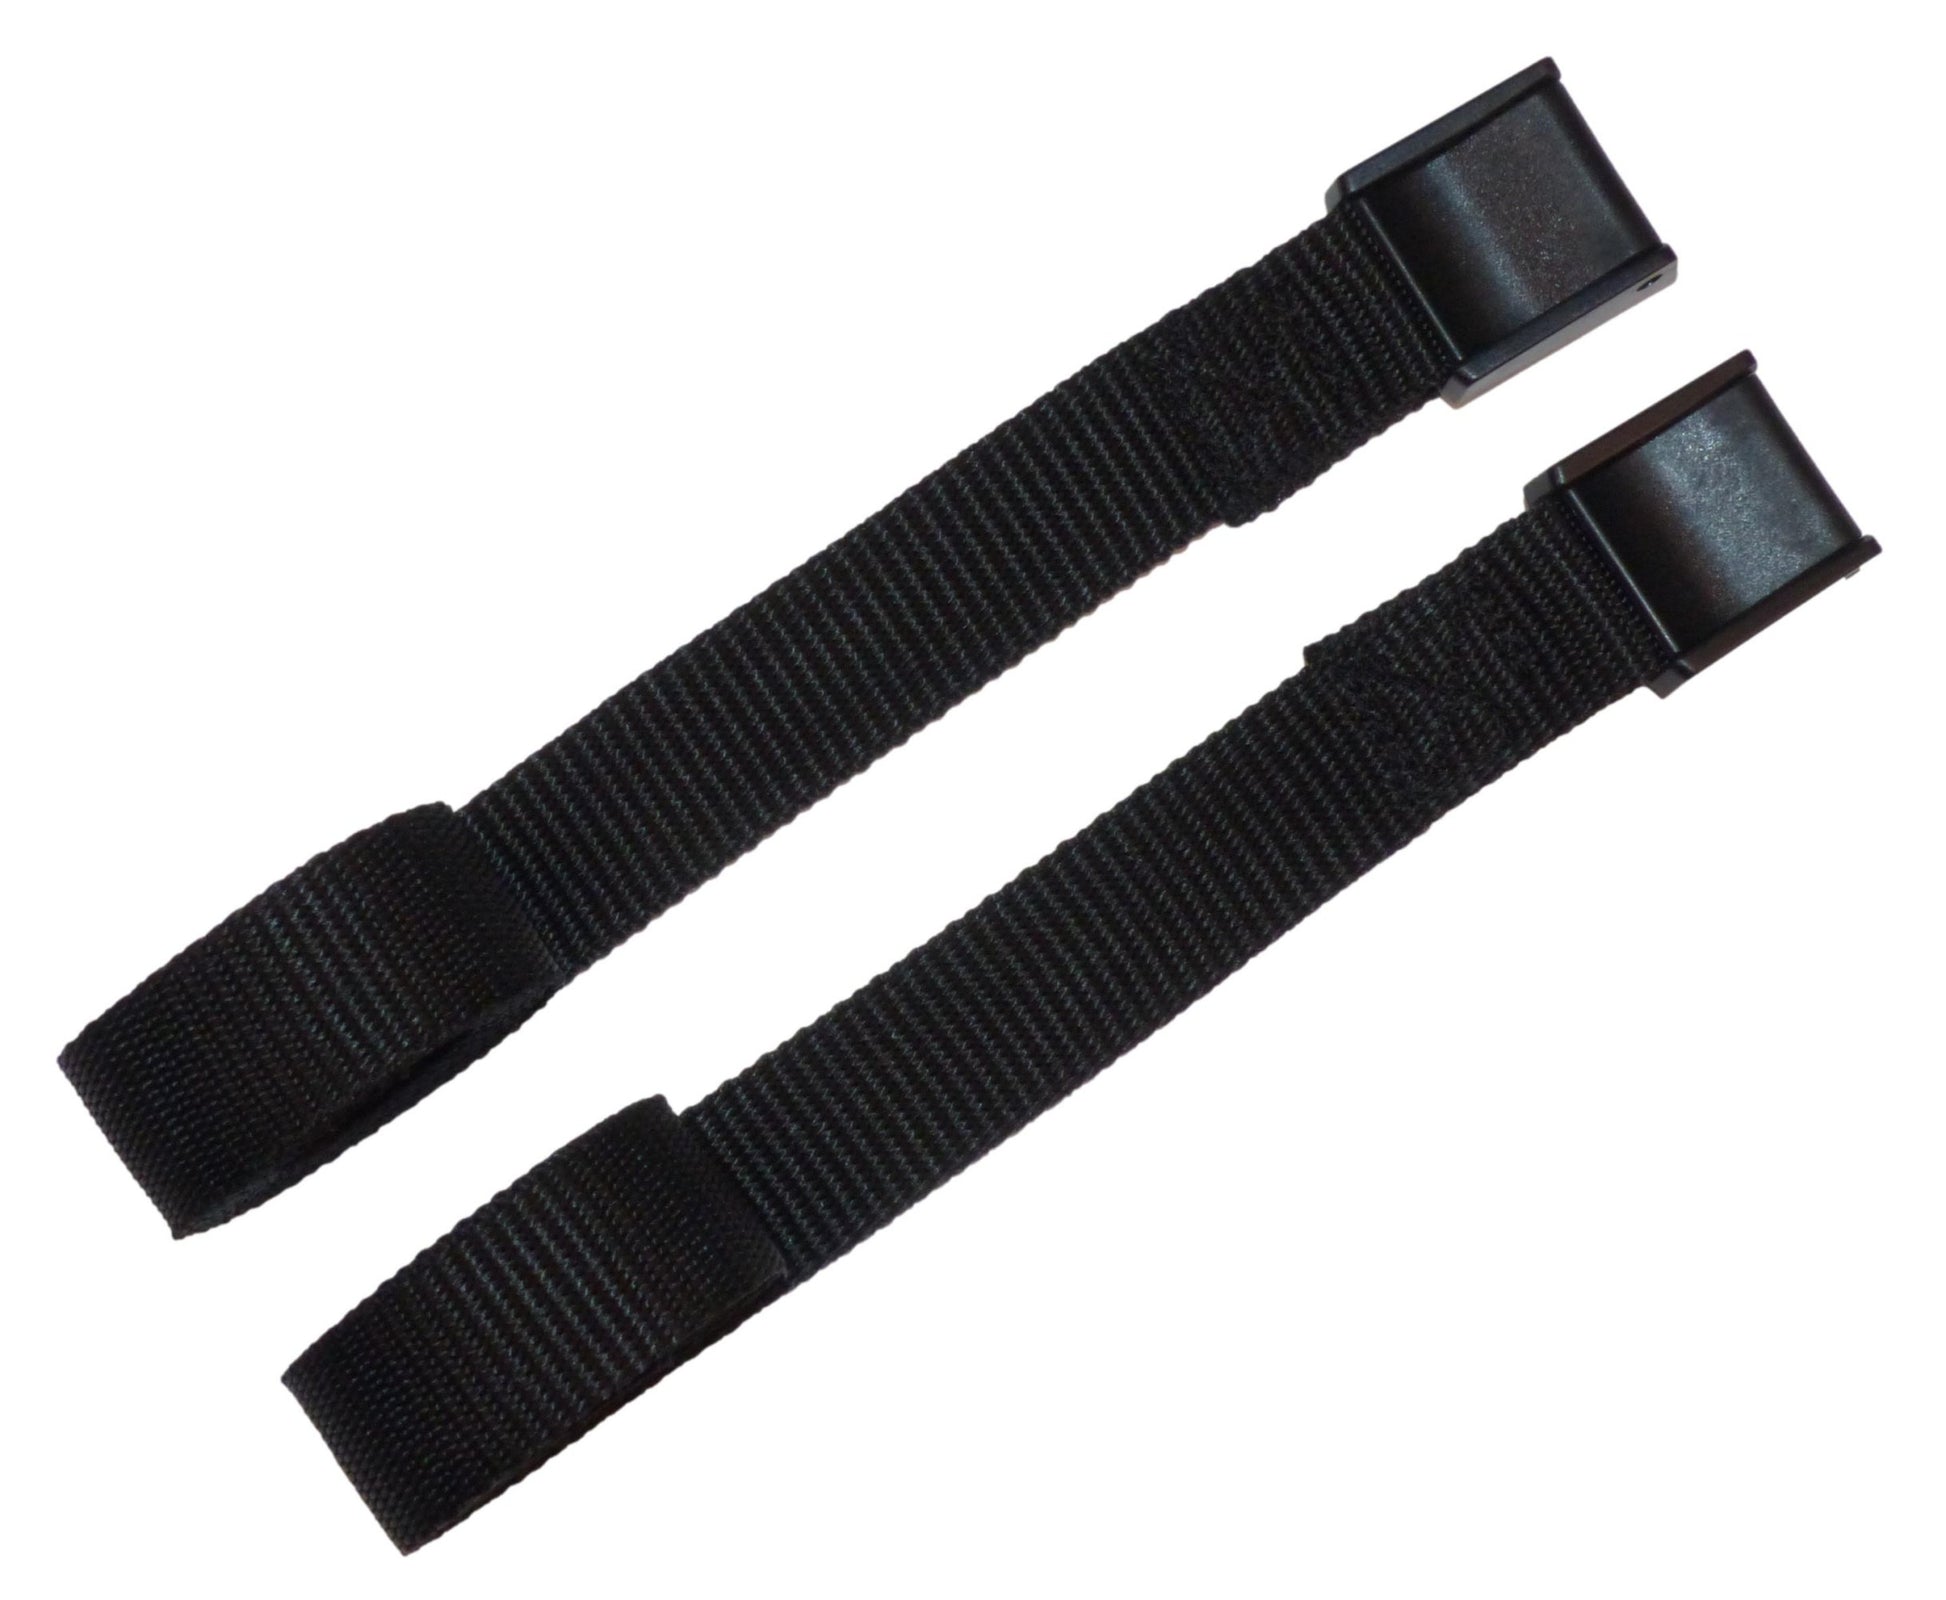 Benristraps 25mm Webbing Strap with Cam Buckle (Pair) in black